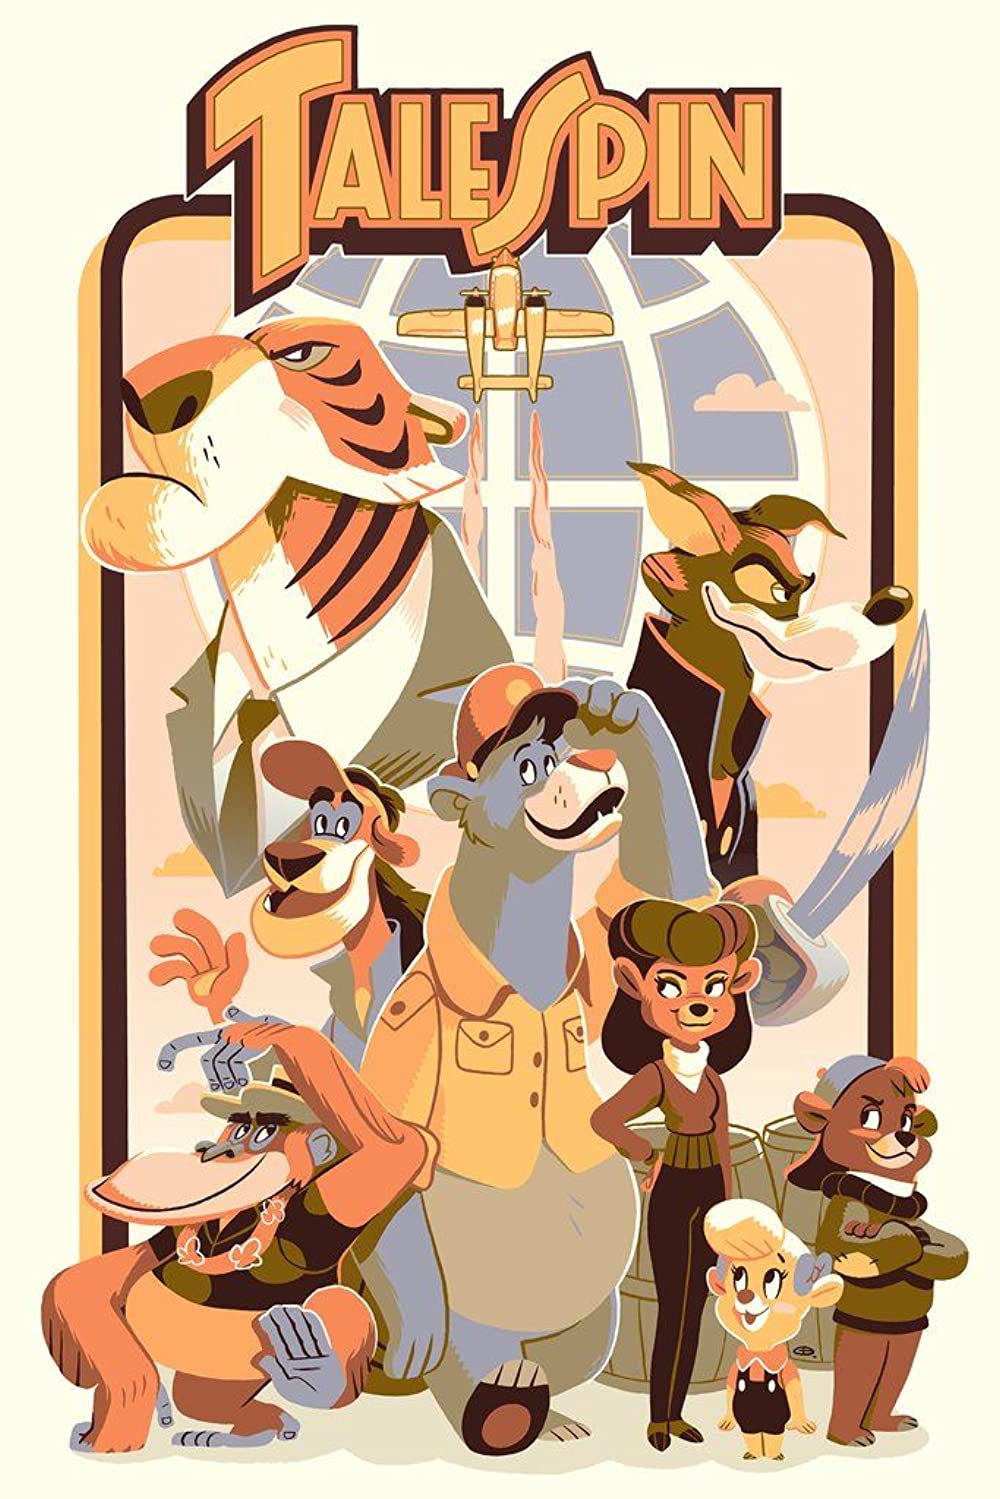 TaleSpin-Best-Old-Hindi-Dubbed-Cartoons-That-We-All-Love - Pop Culture,  Entertainment, Humor, Travel & More